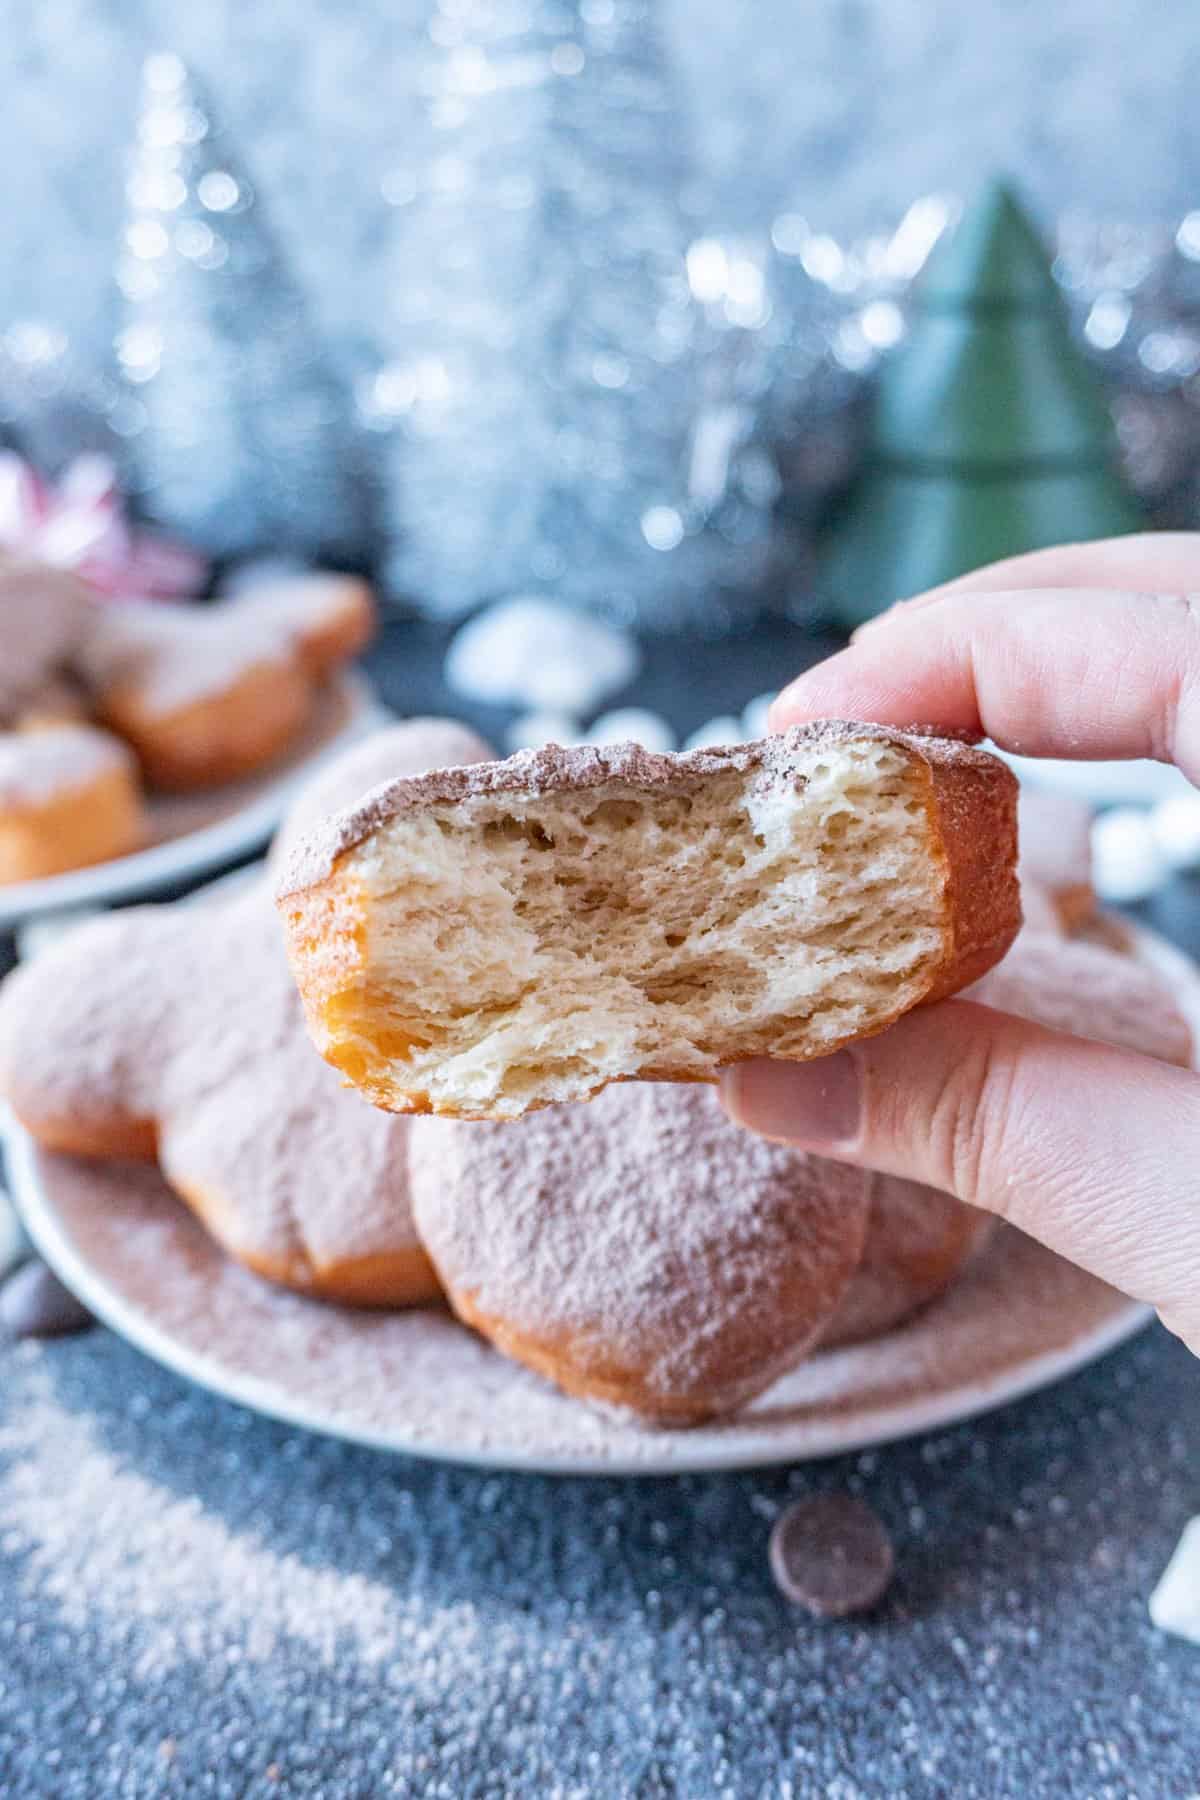 hot cocoa beignet with inside shown